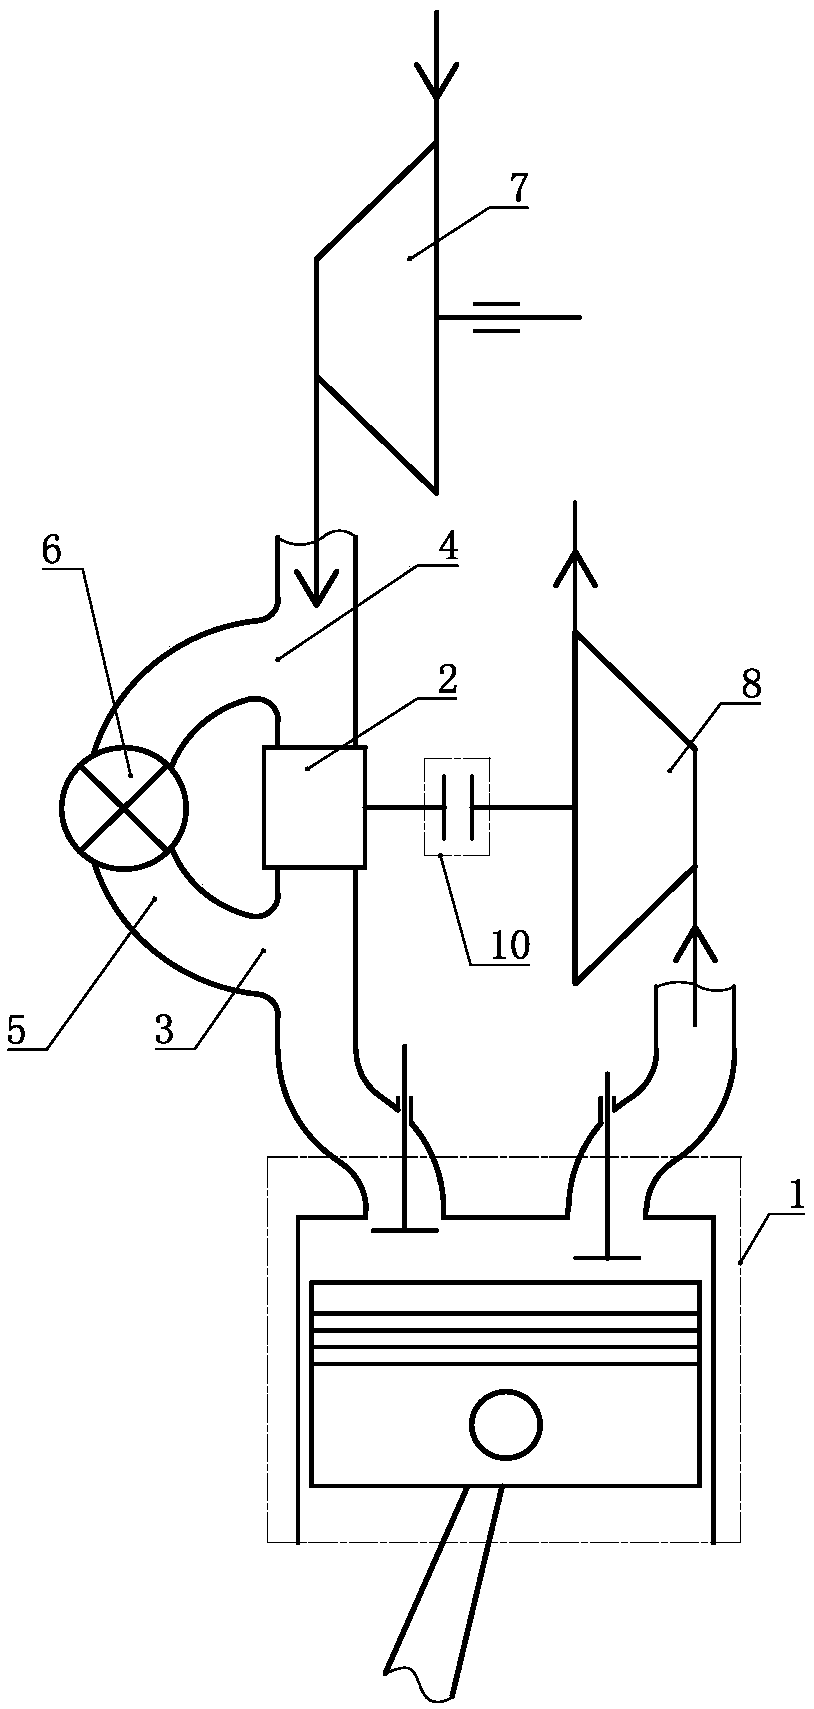 Engine with working condition capable of switching miller cycle logic